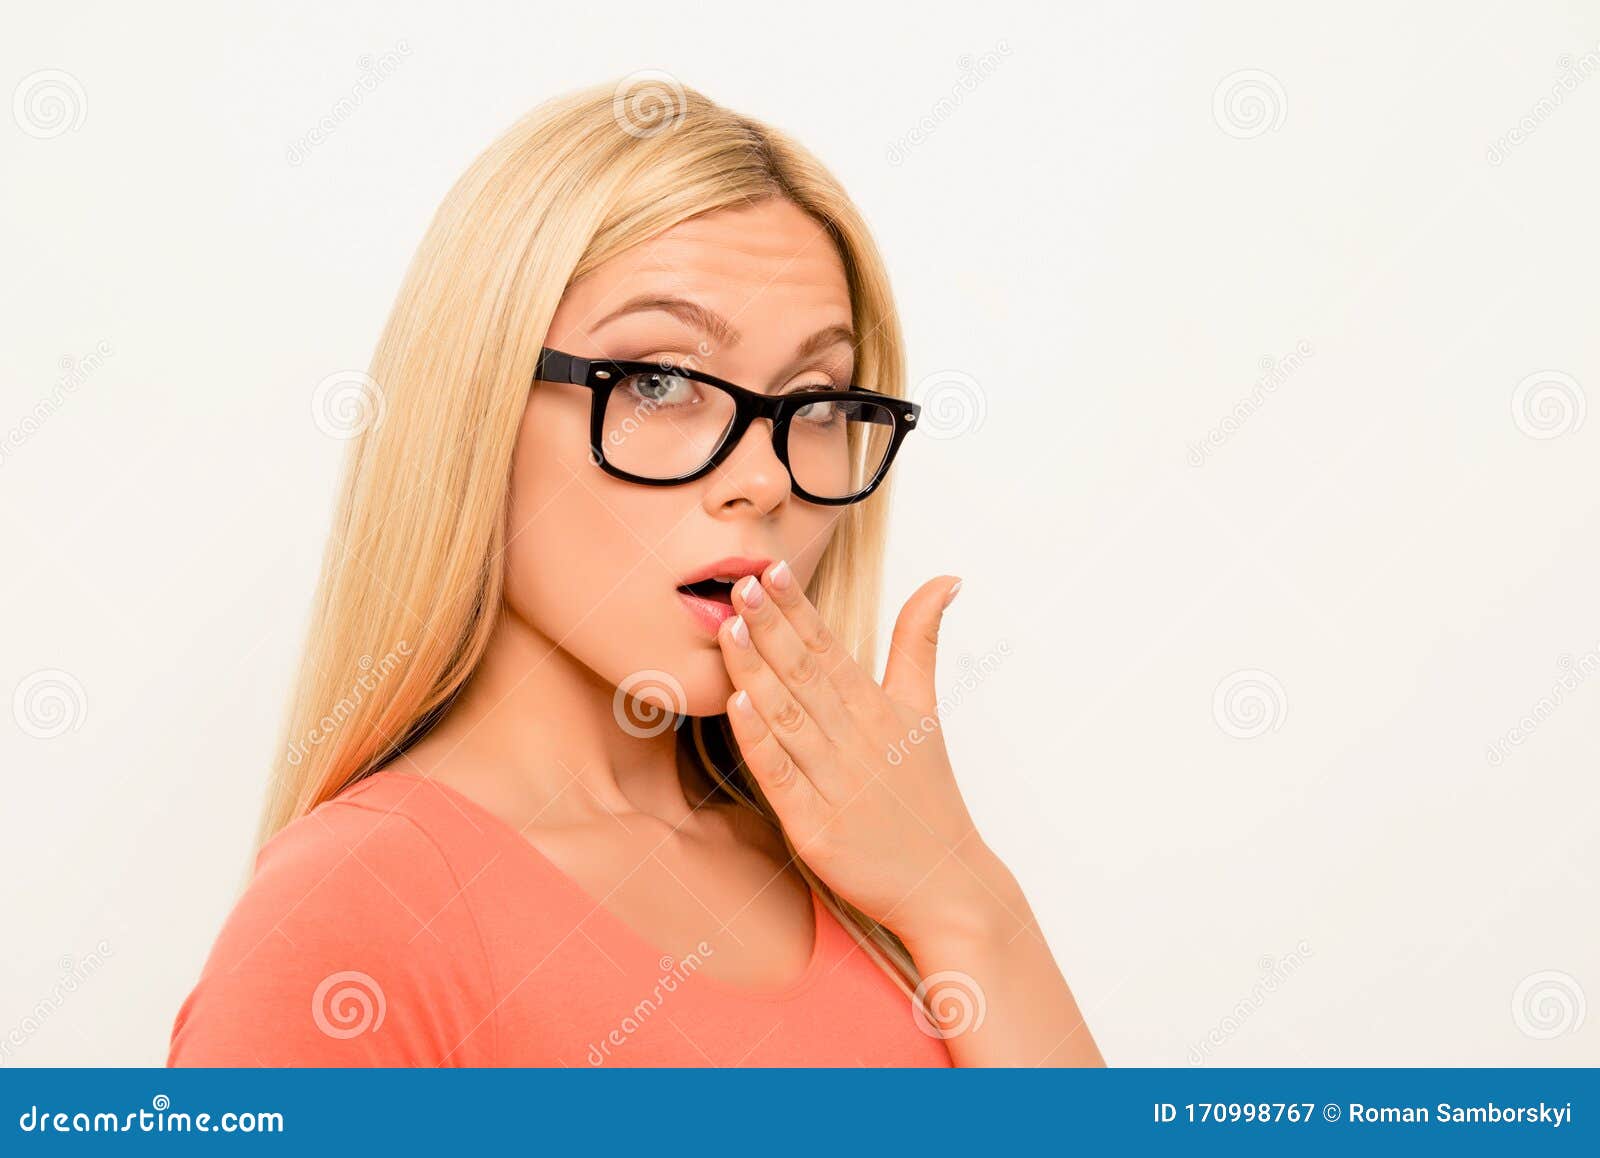 shocked brainy girl in glasses holding hand near mouth